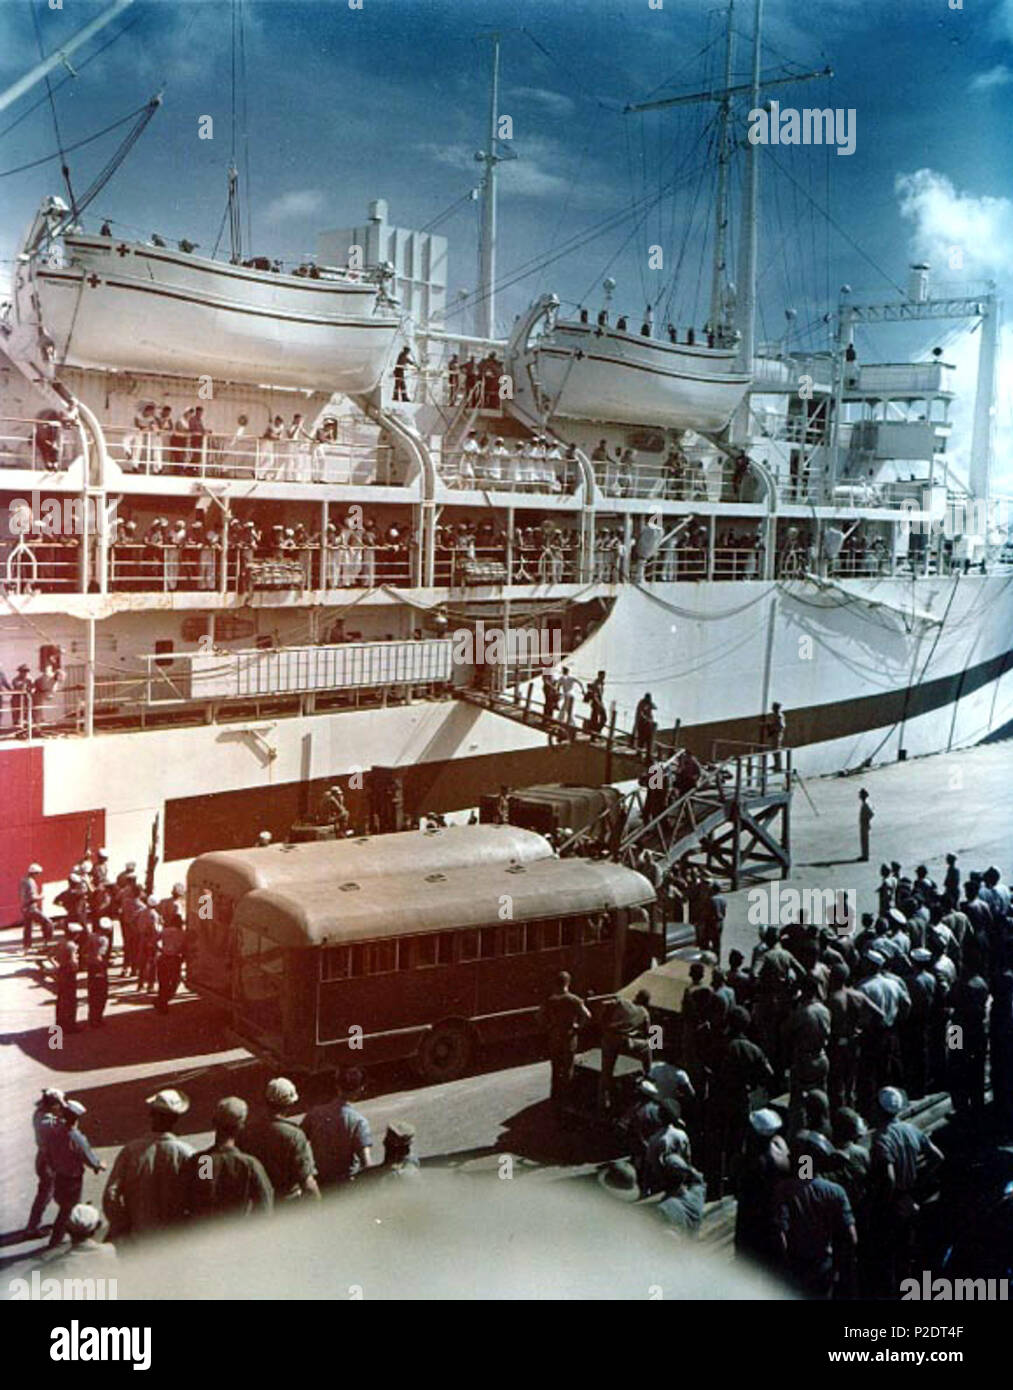 . Survivors of the heavy cruiser USS Indianapolis (CA-35) are brought ashore from the U.S. Navy hospital ship USS Tranquillity (AH-14) at Guam, 8 August 1945. Nurses and sailors are watching from the hospital ship's deck. Note Tranquillity's nested lifeboats and the busses on the pier. 8 August 1945. USN 61 Survivors of USS Indianapolis (CA-35) arrive at Guam in August 1945 Stock Photo